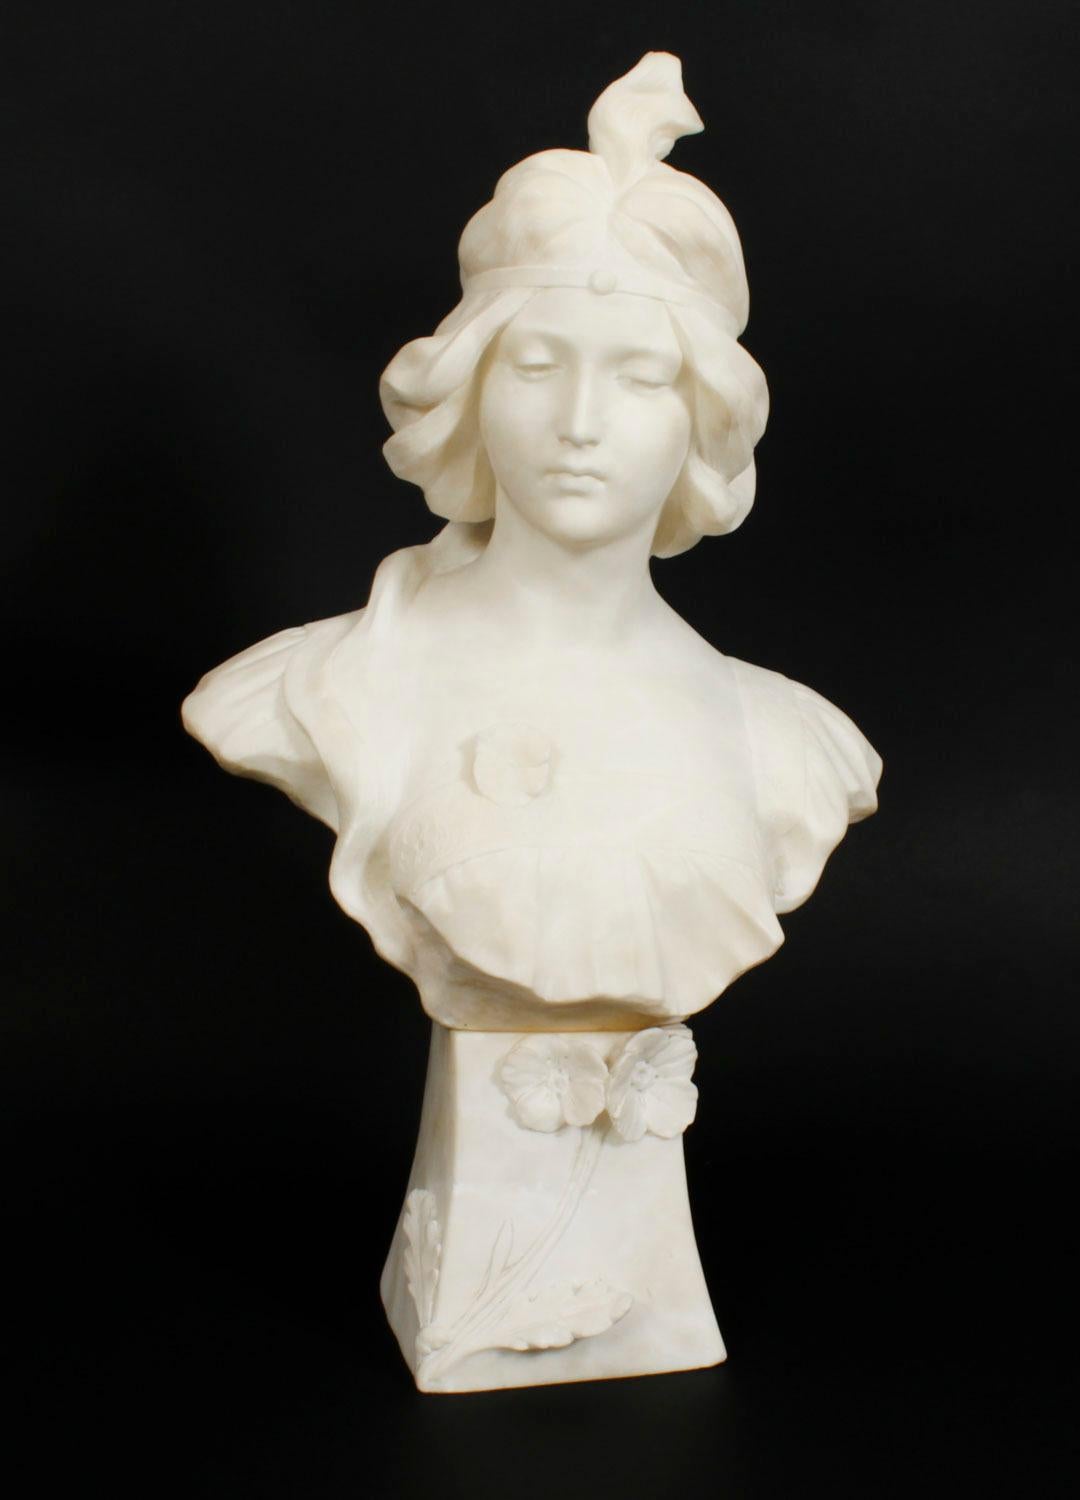 This is beautiful antique French Art Nouveau alabaster shoulder length bust of a beautiful maiden,  Circa 1890 in date.

The  stylized Art Nouveau face and body has been sensitively modelled in alabaster on a shaped floral base.

There is no